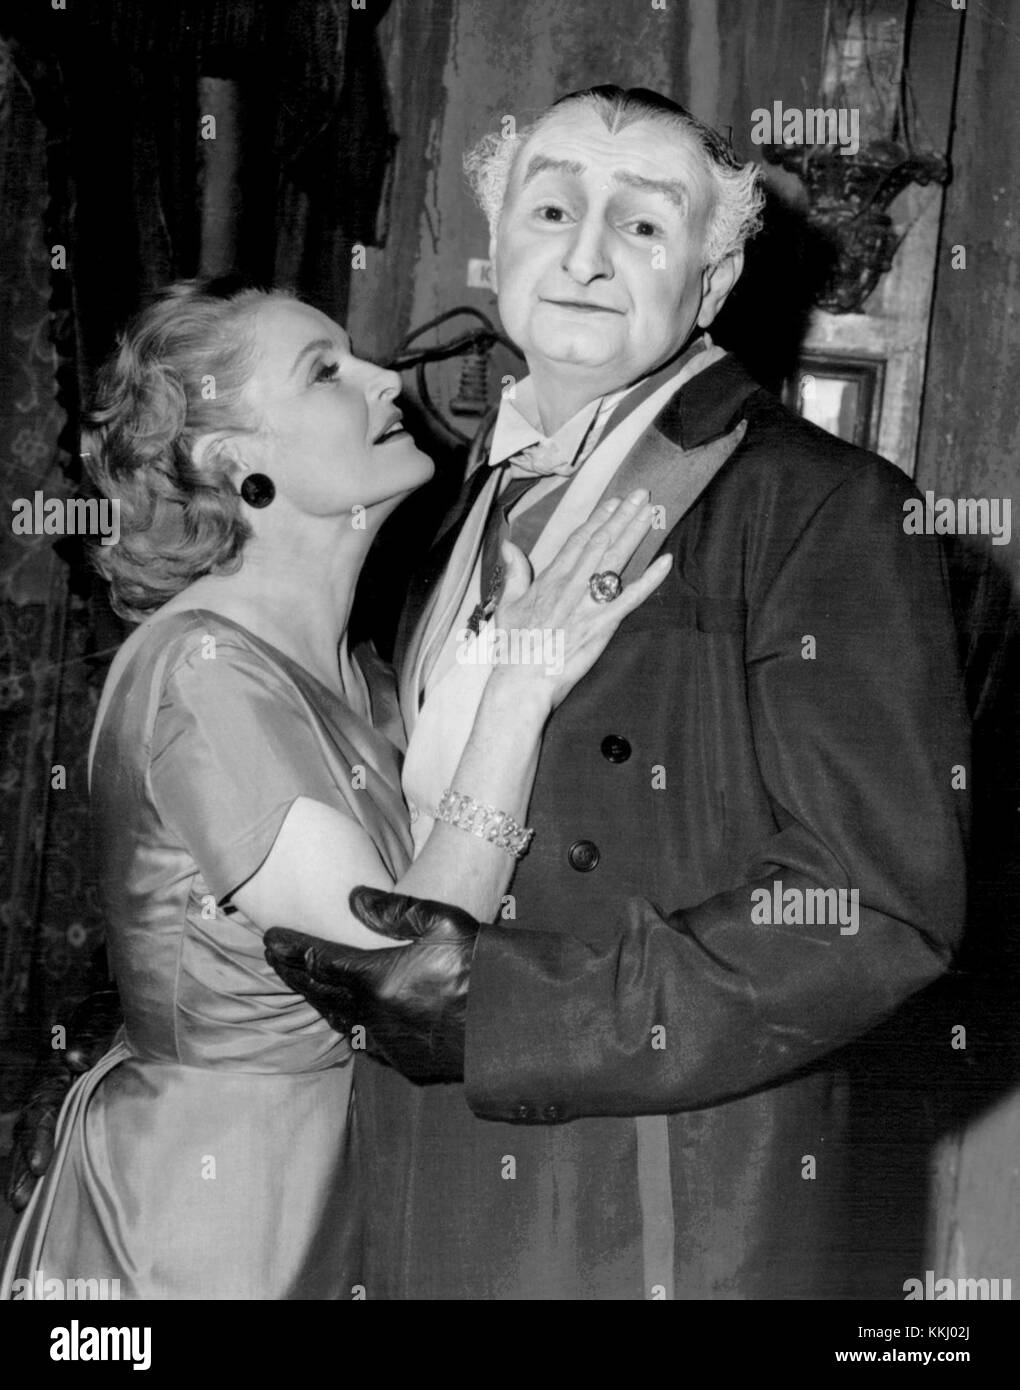 Al Lewis The Munsters 1964 Stock Photo